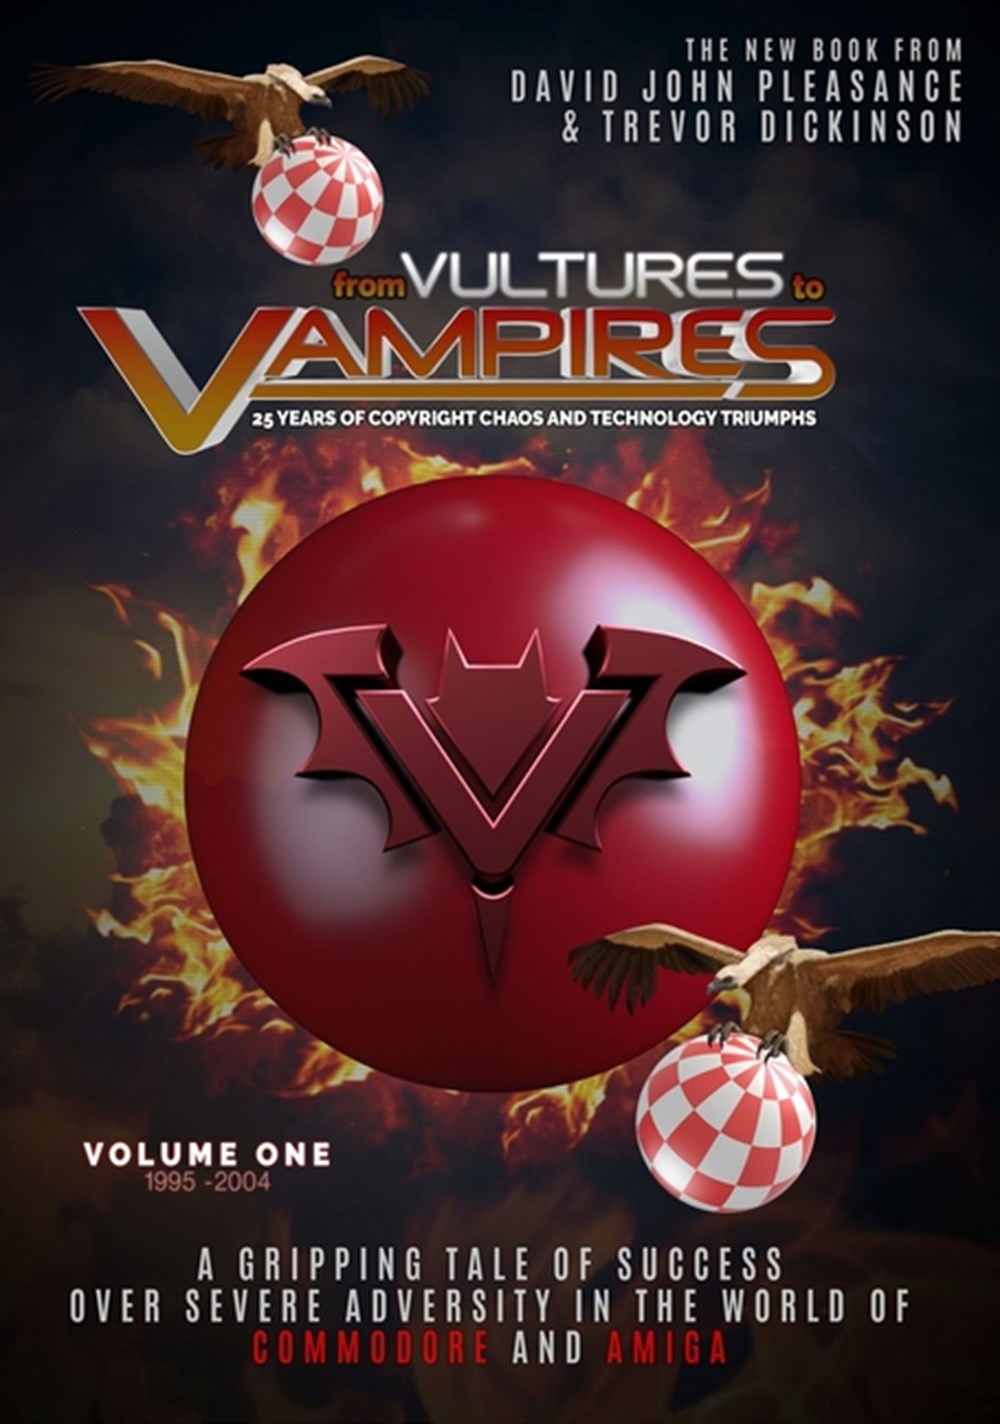 From Vultures to Vampires 25 Years of Copyright Chaos and Technology Triumphs, Volume One: 1995-2004